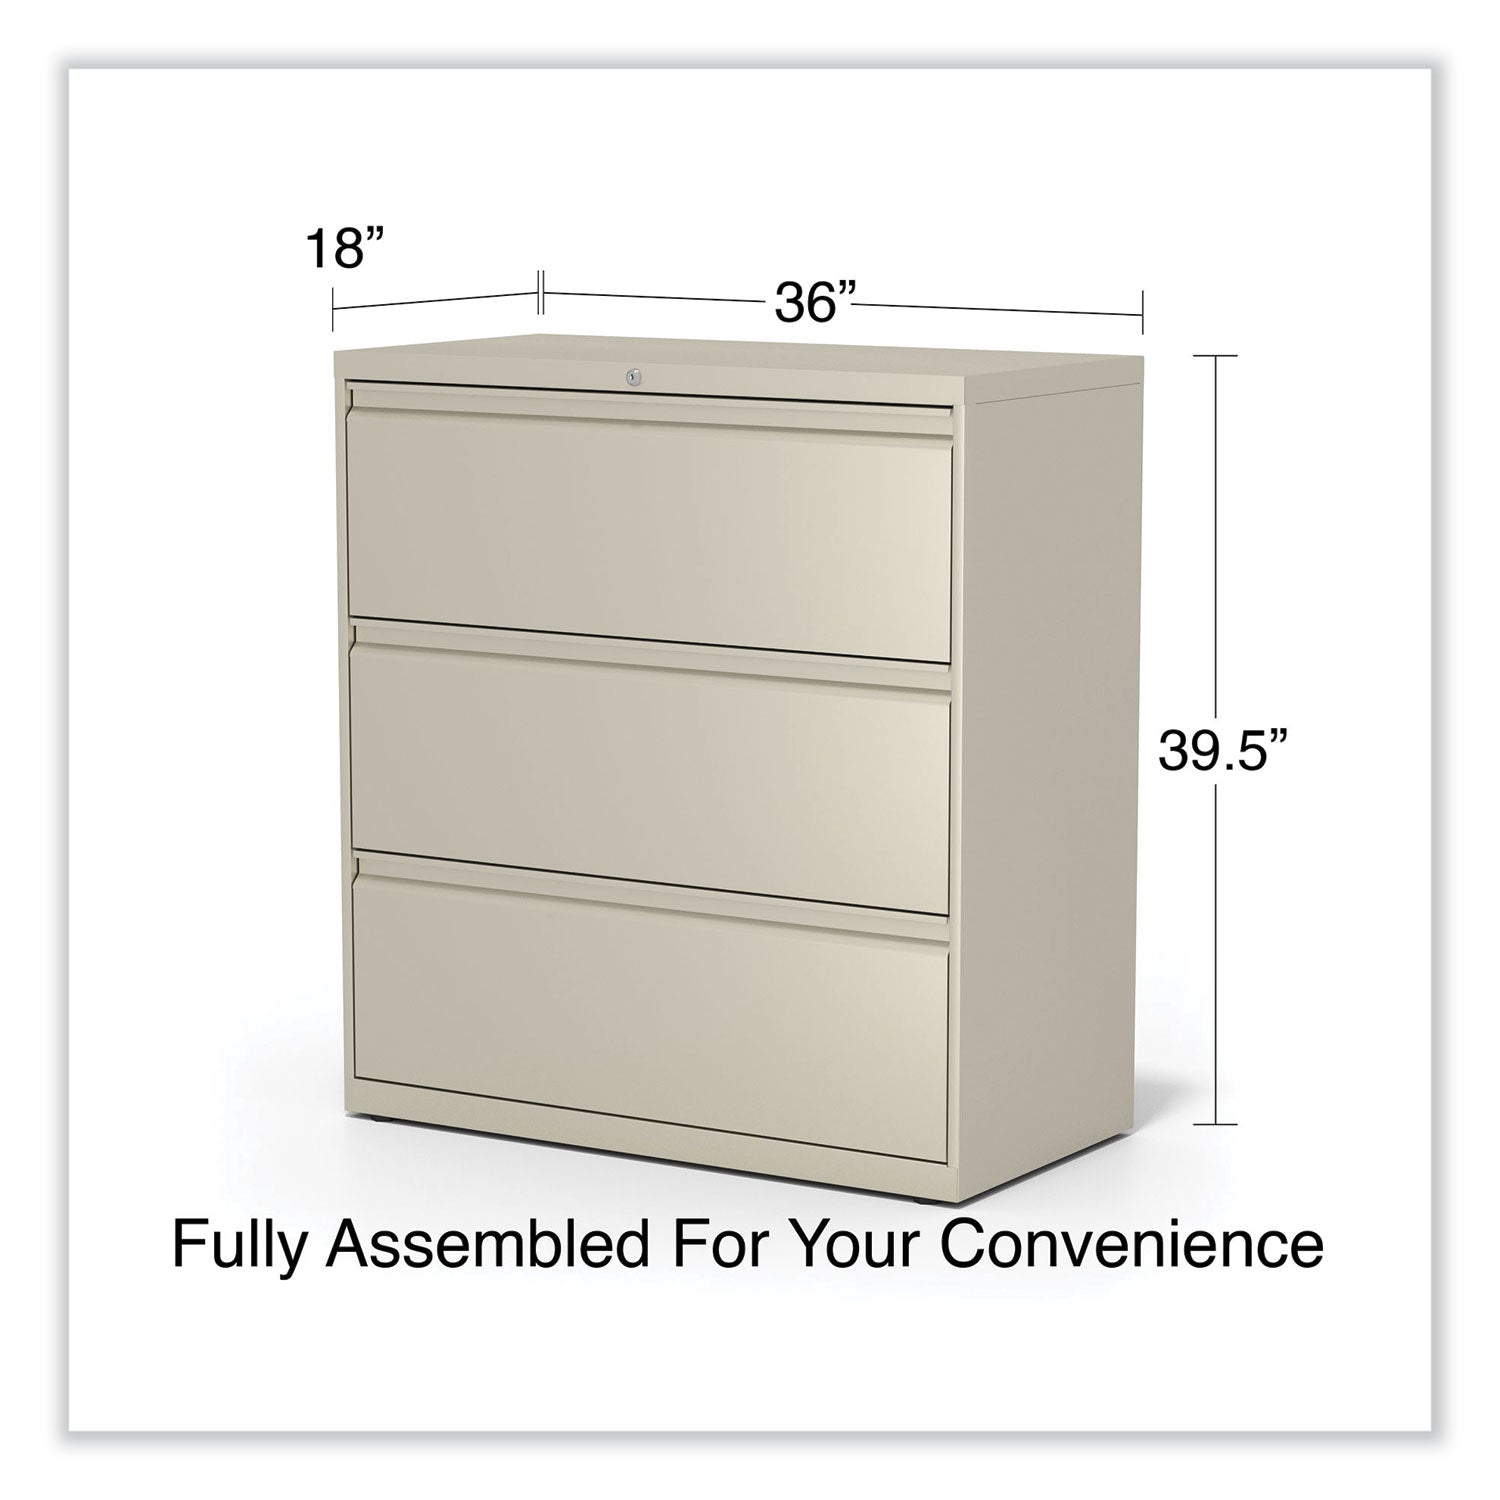 lateral-file-3-legal-letter-a4-a5-size-file-drawers-putty-36-x-1863-x-4025_alehlf3641py - 6